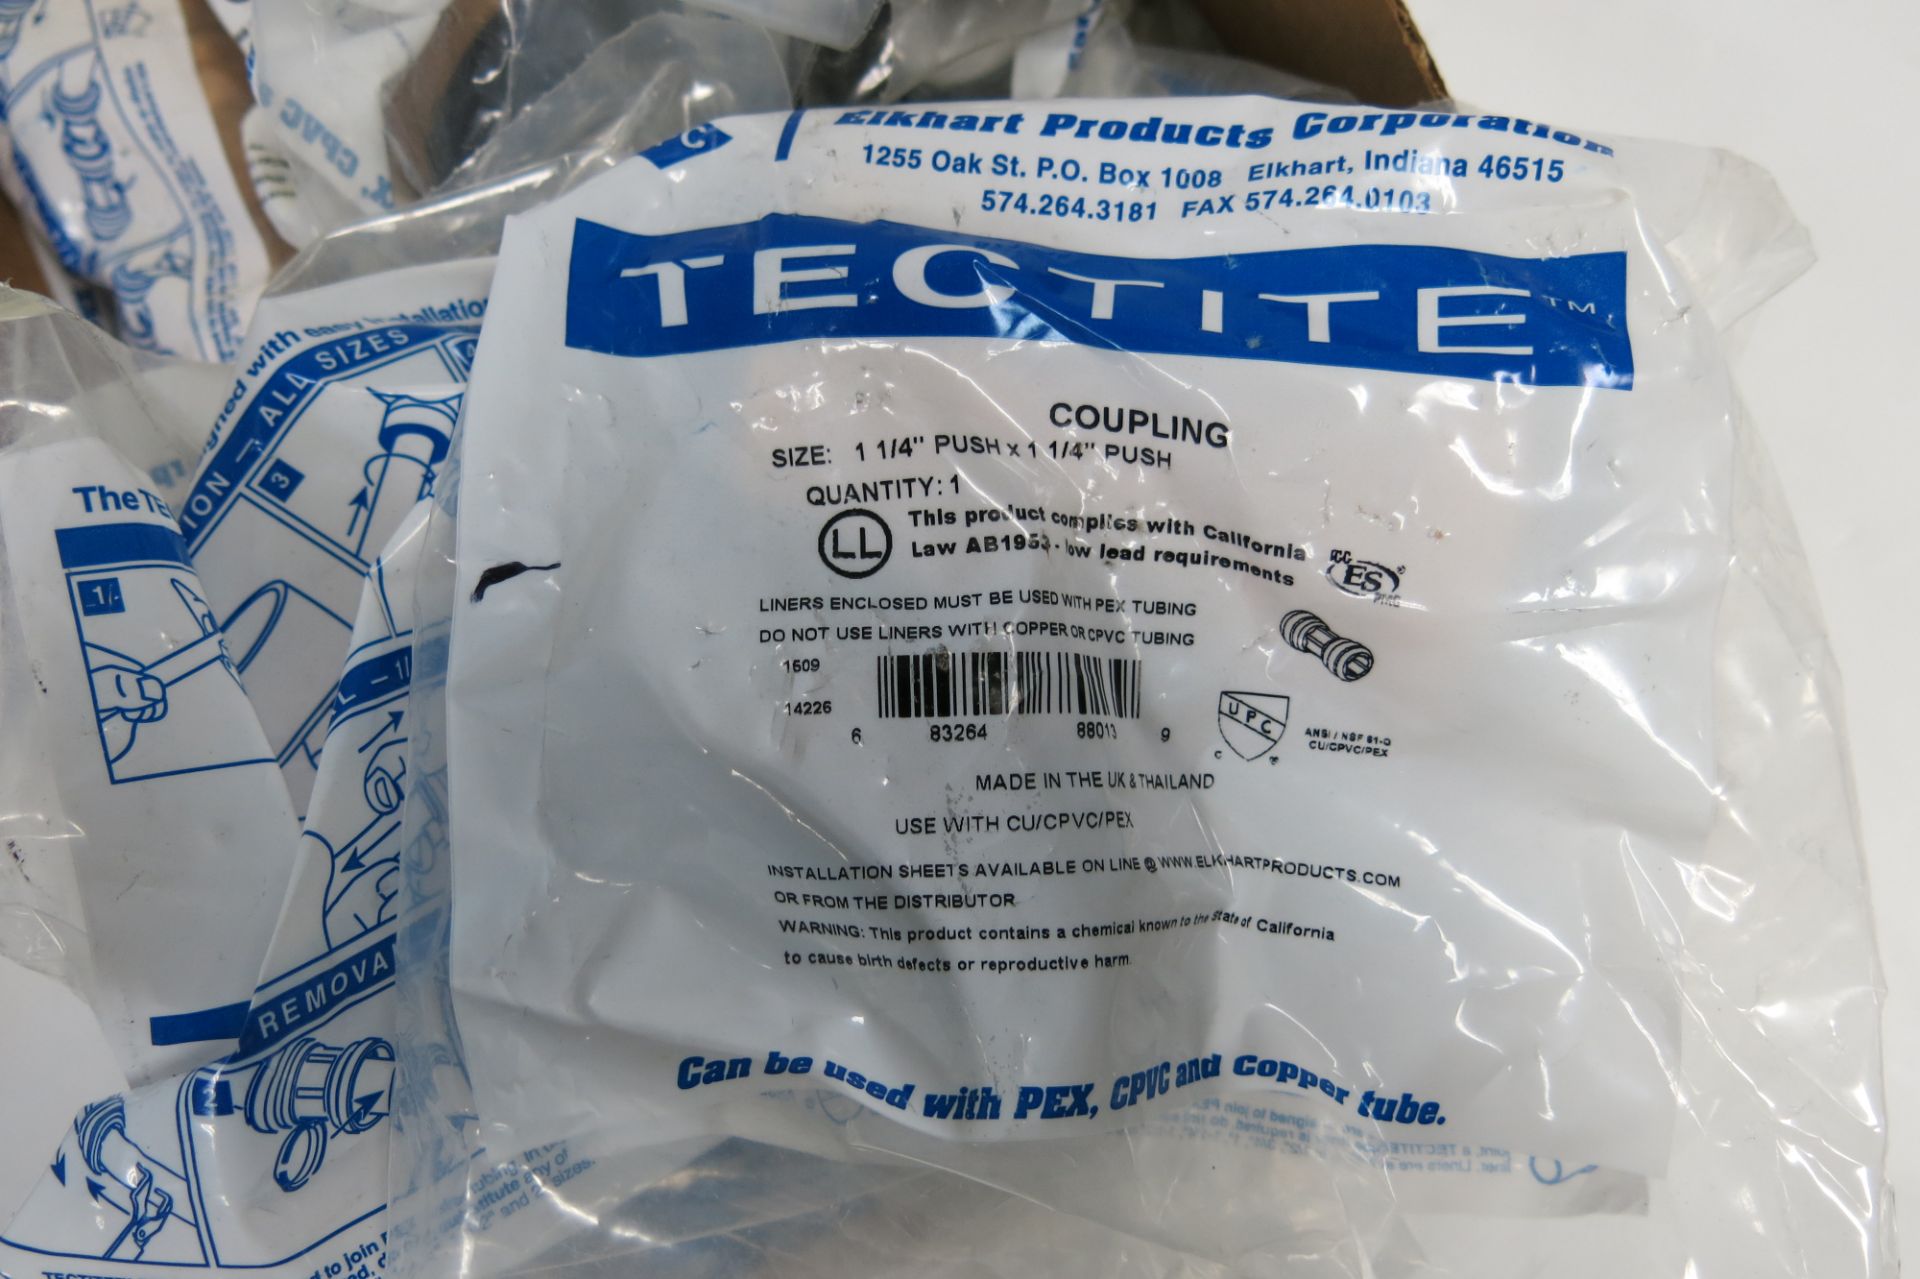 TECTITE, 1 1/4" X 1 1/4" PUSH COUPLINGS - NEW (LOCATED IN MISSISSAUGA) - Image 2 of 3